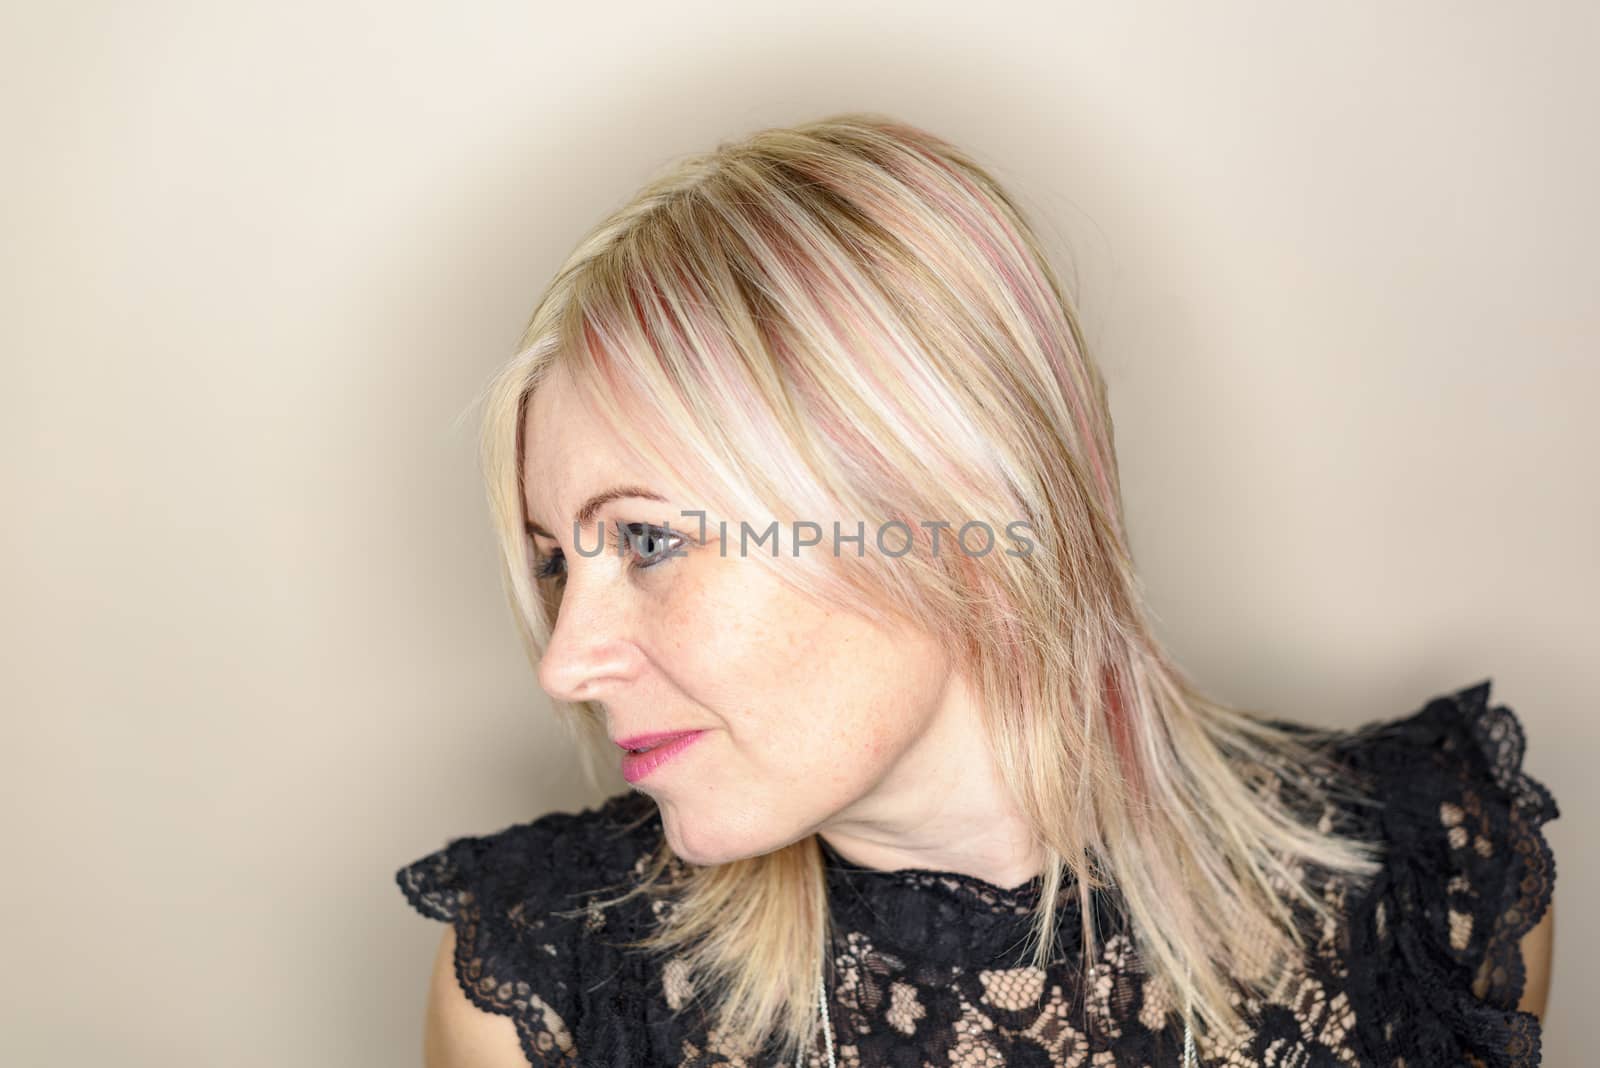 Uk, Leicestershire - Jan 2017 - Caucasian woman mid 40's with pink dye in hair wearing a black top